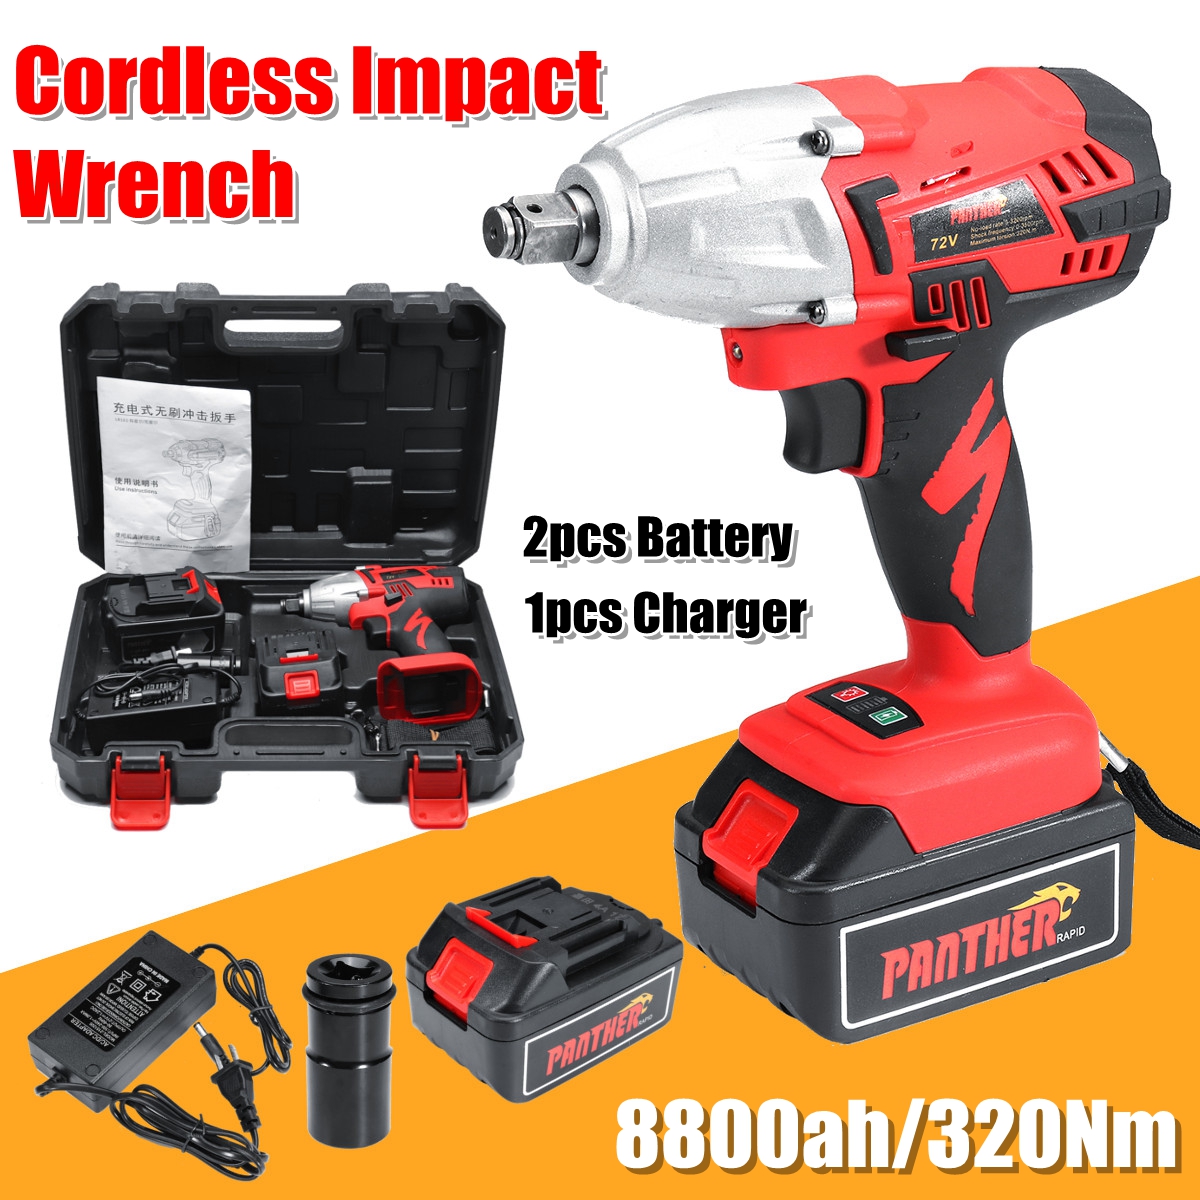 8800mah-Cordless-Electric-Impact-Wrench-LED-Light-320Nm-Torque-Impact-Wrench-Li-Ion-Battery-1402464-2